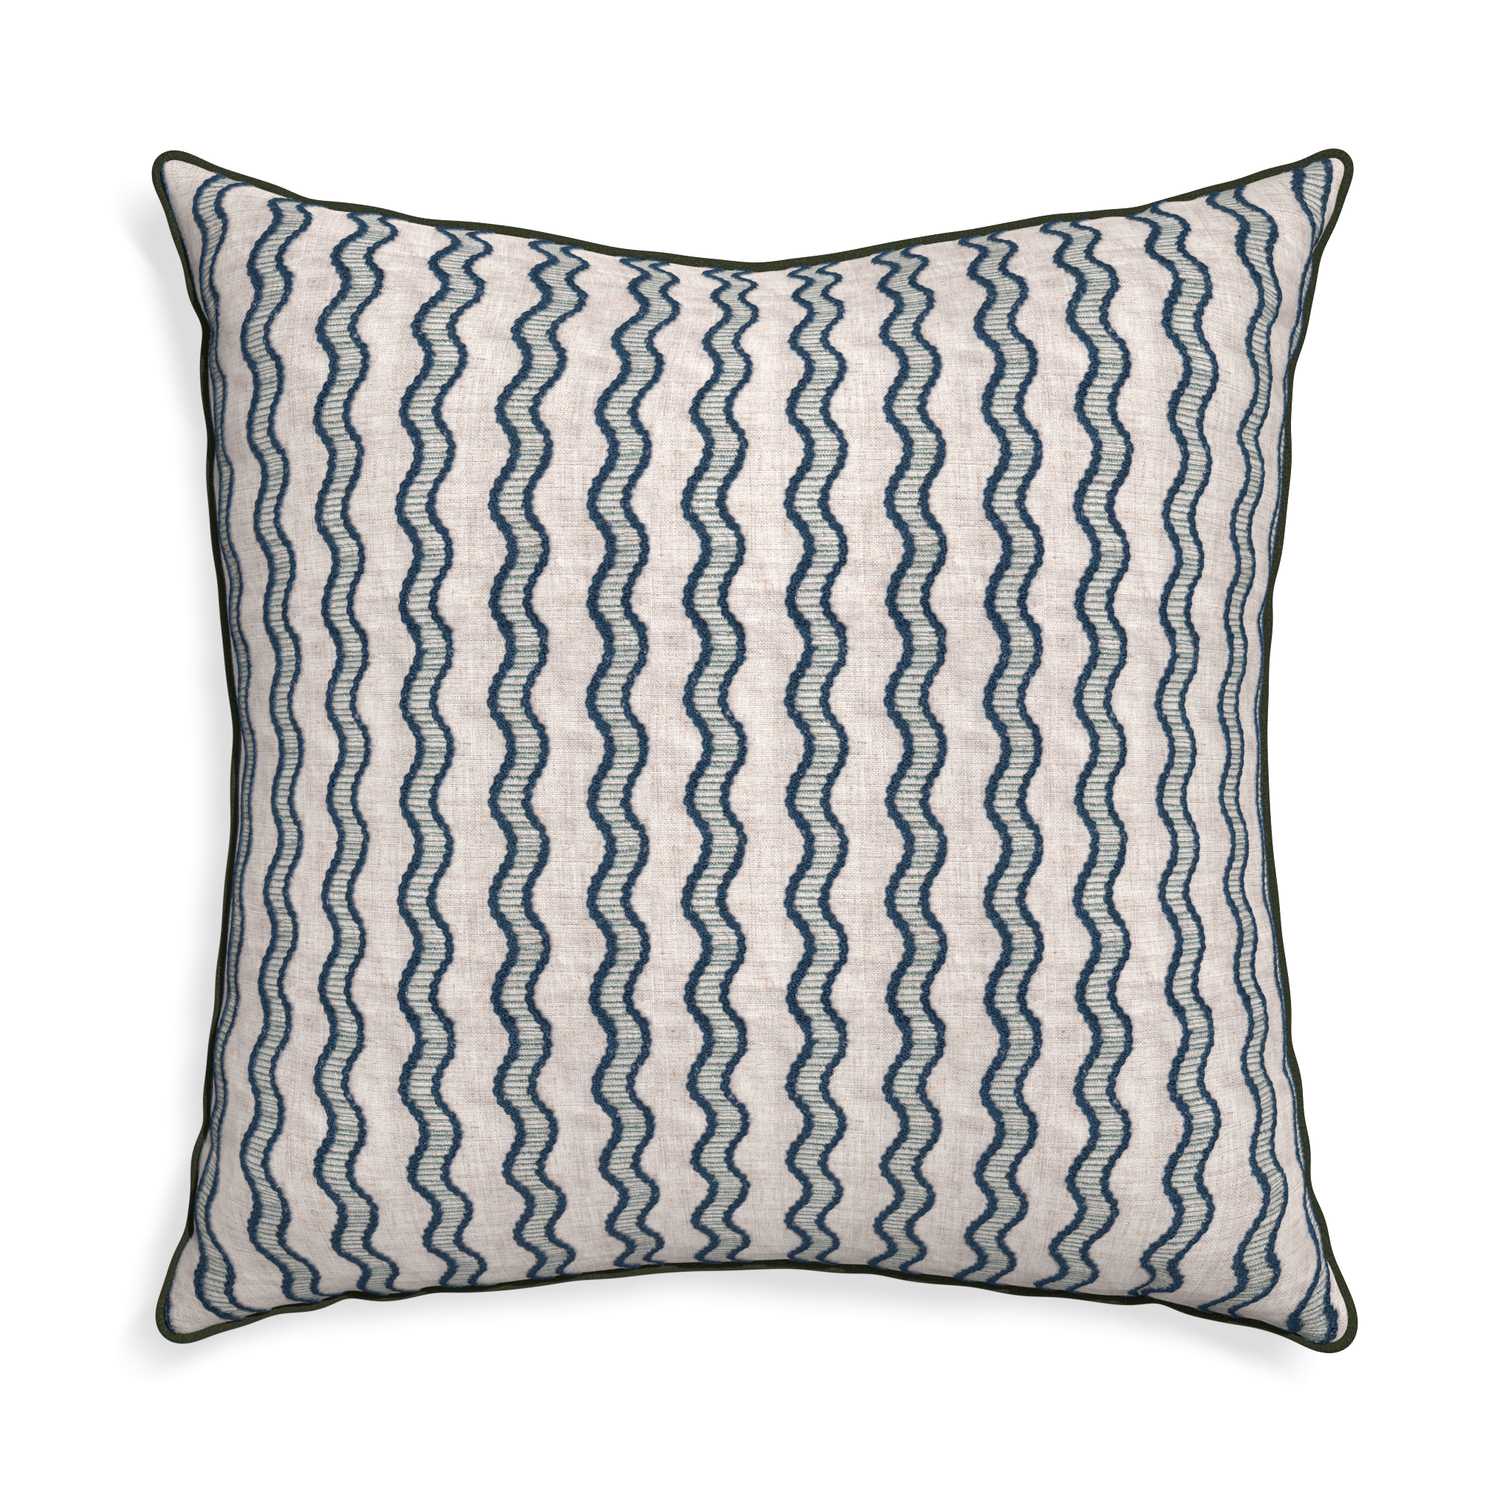 Euro-sham beatrice custom embroidered wavepillow with f piping on white background